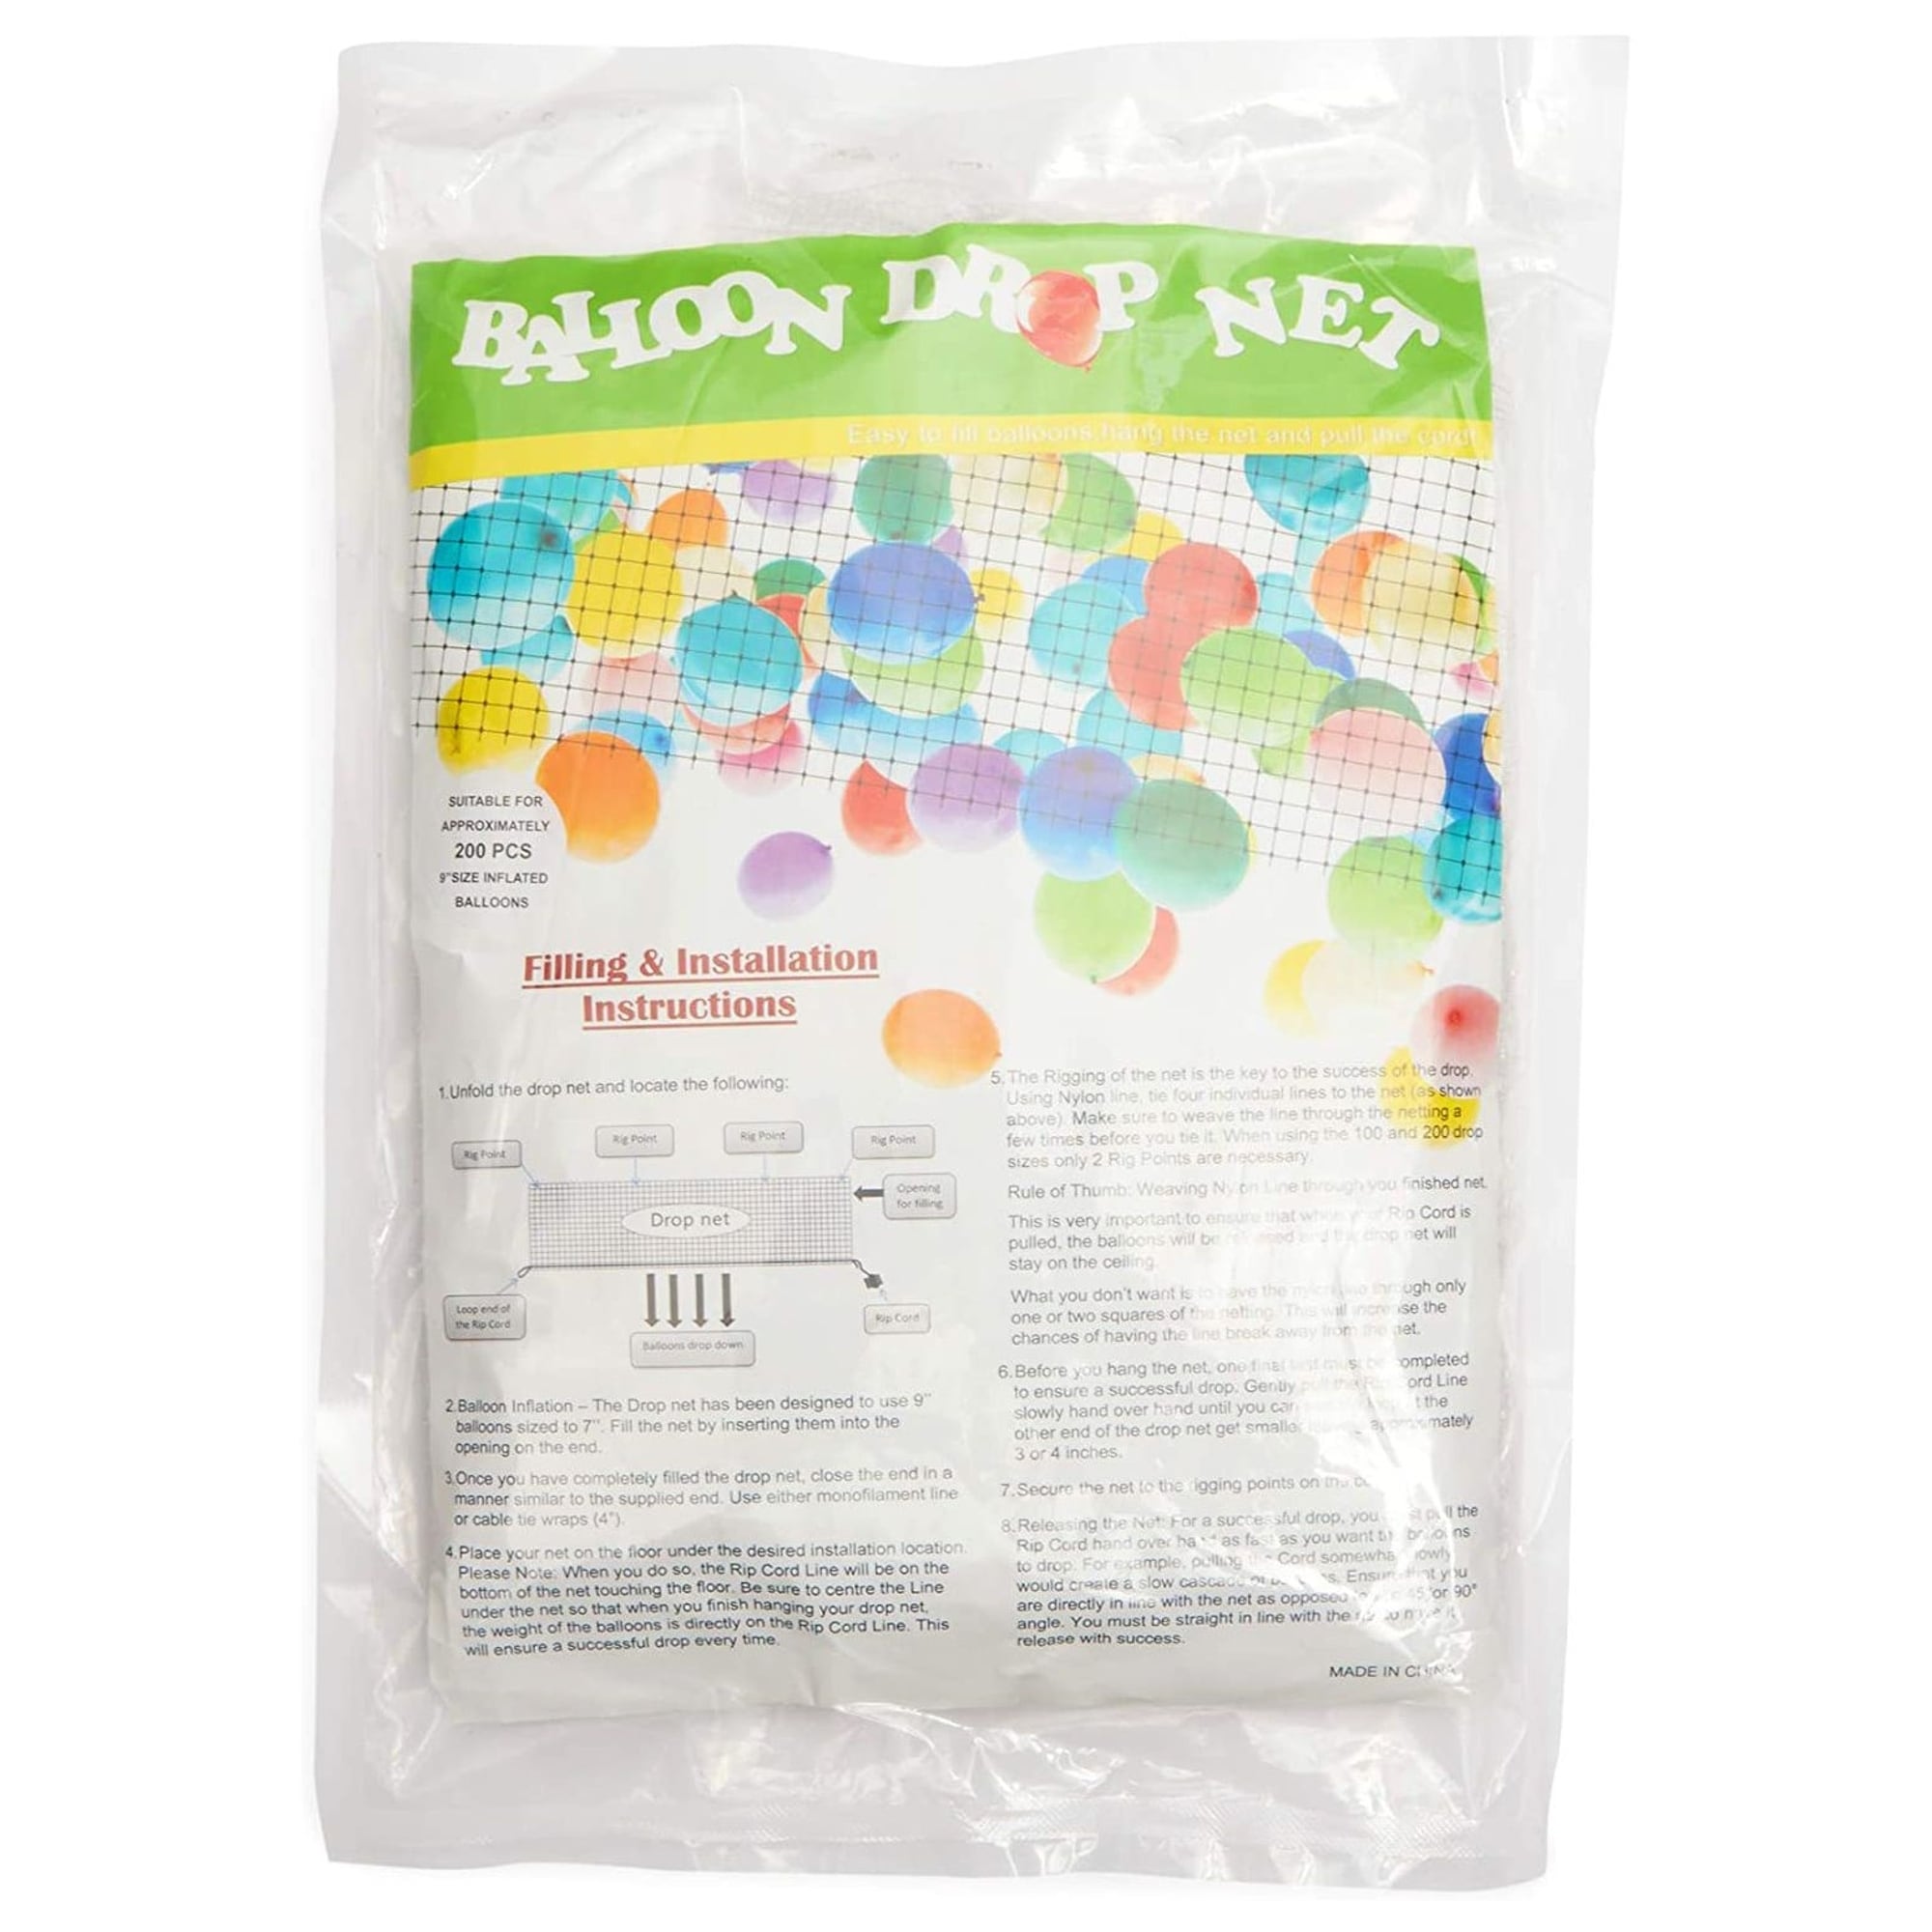 Balloon Drop Net for Ceiling Release at Birthdays, Graduation, New Years  Party Decorations, 15.7 Ft - Bed Bath & Beyond - 38212528